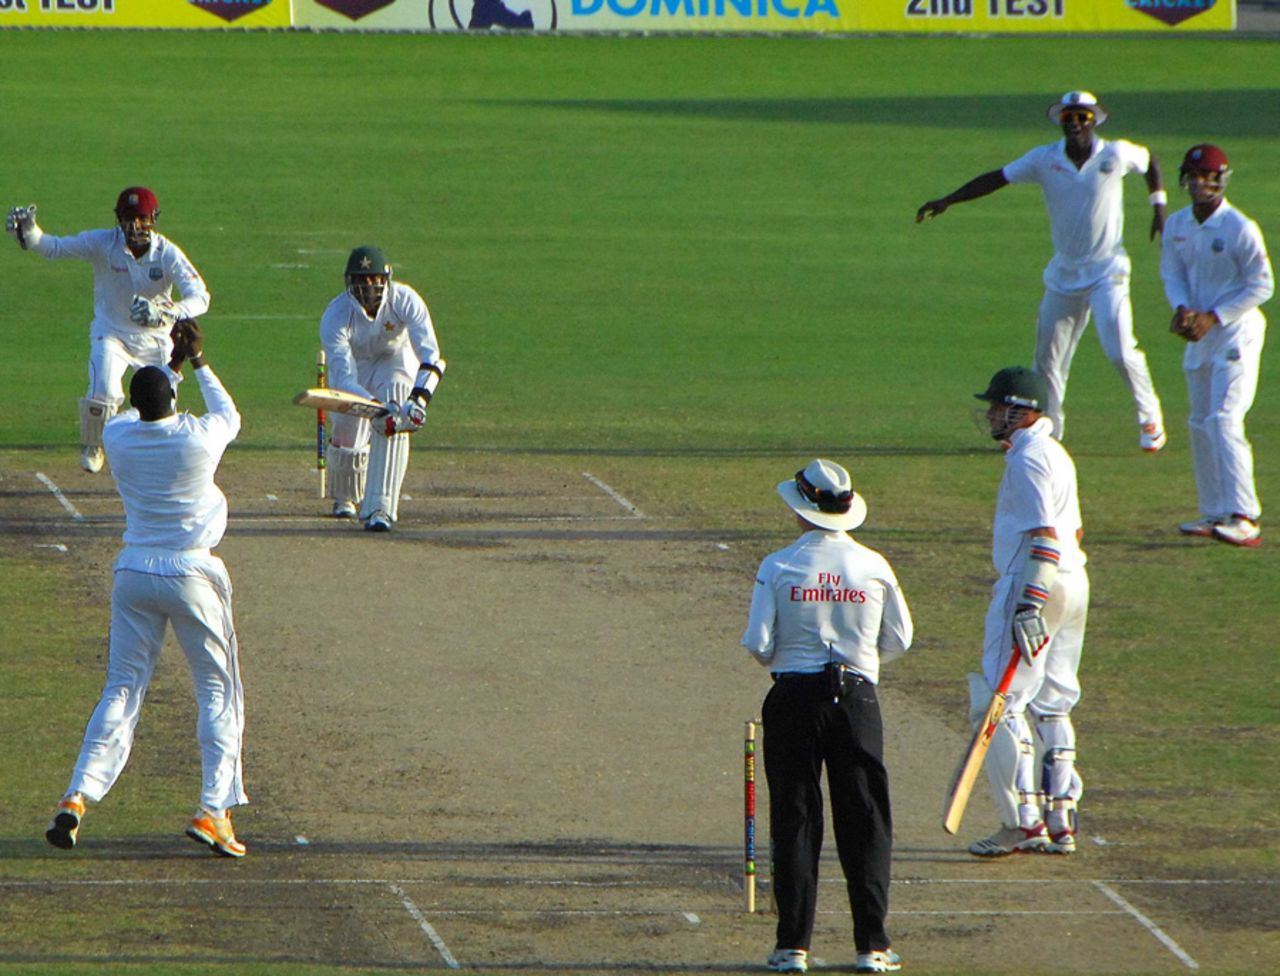 Vusi Sibanda is caught by Shane Shillingford, West Indies v Zimbabwe, 1st Test, Barbados, 2nd day, March 13, 2013